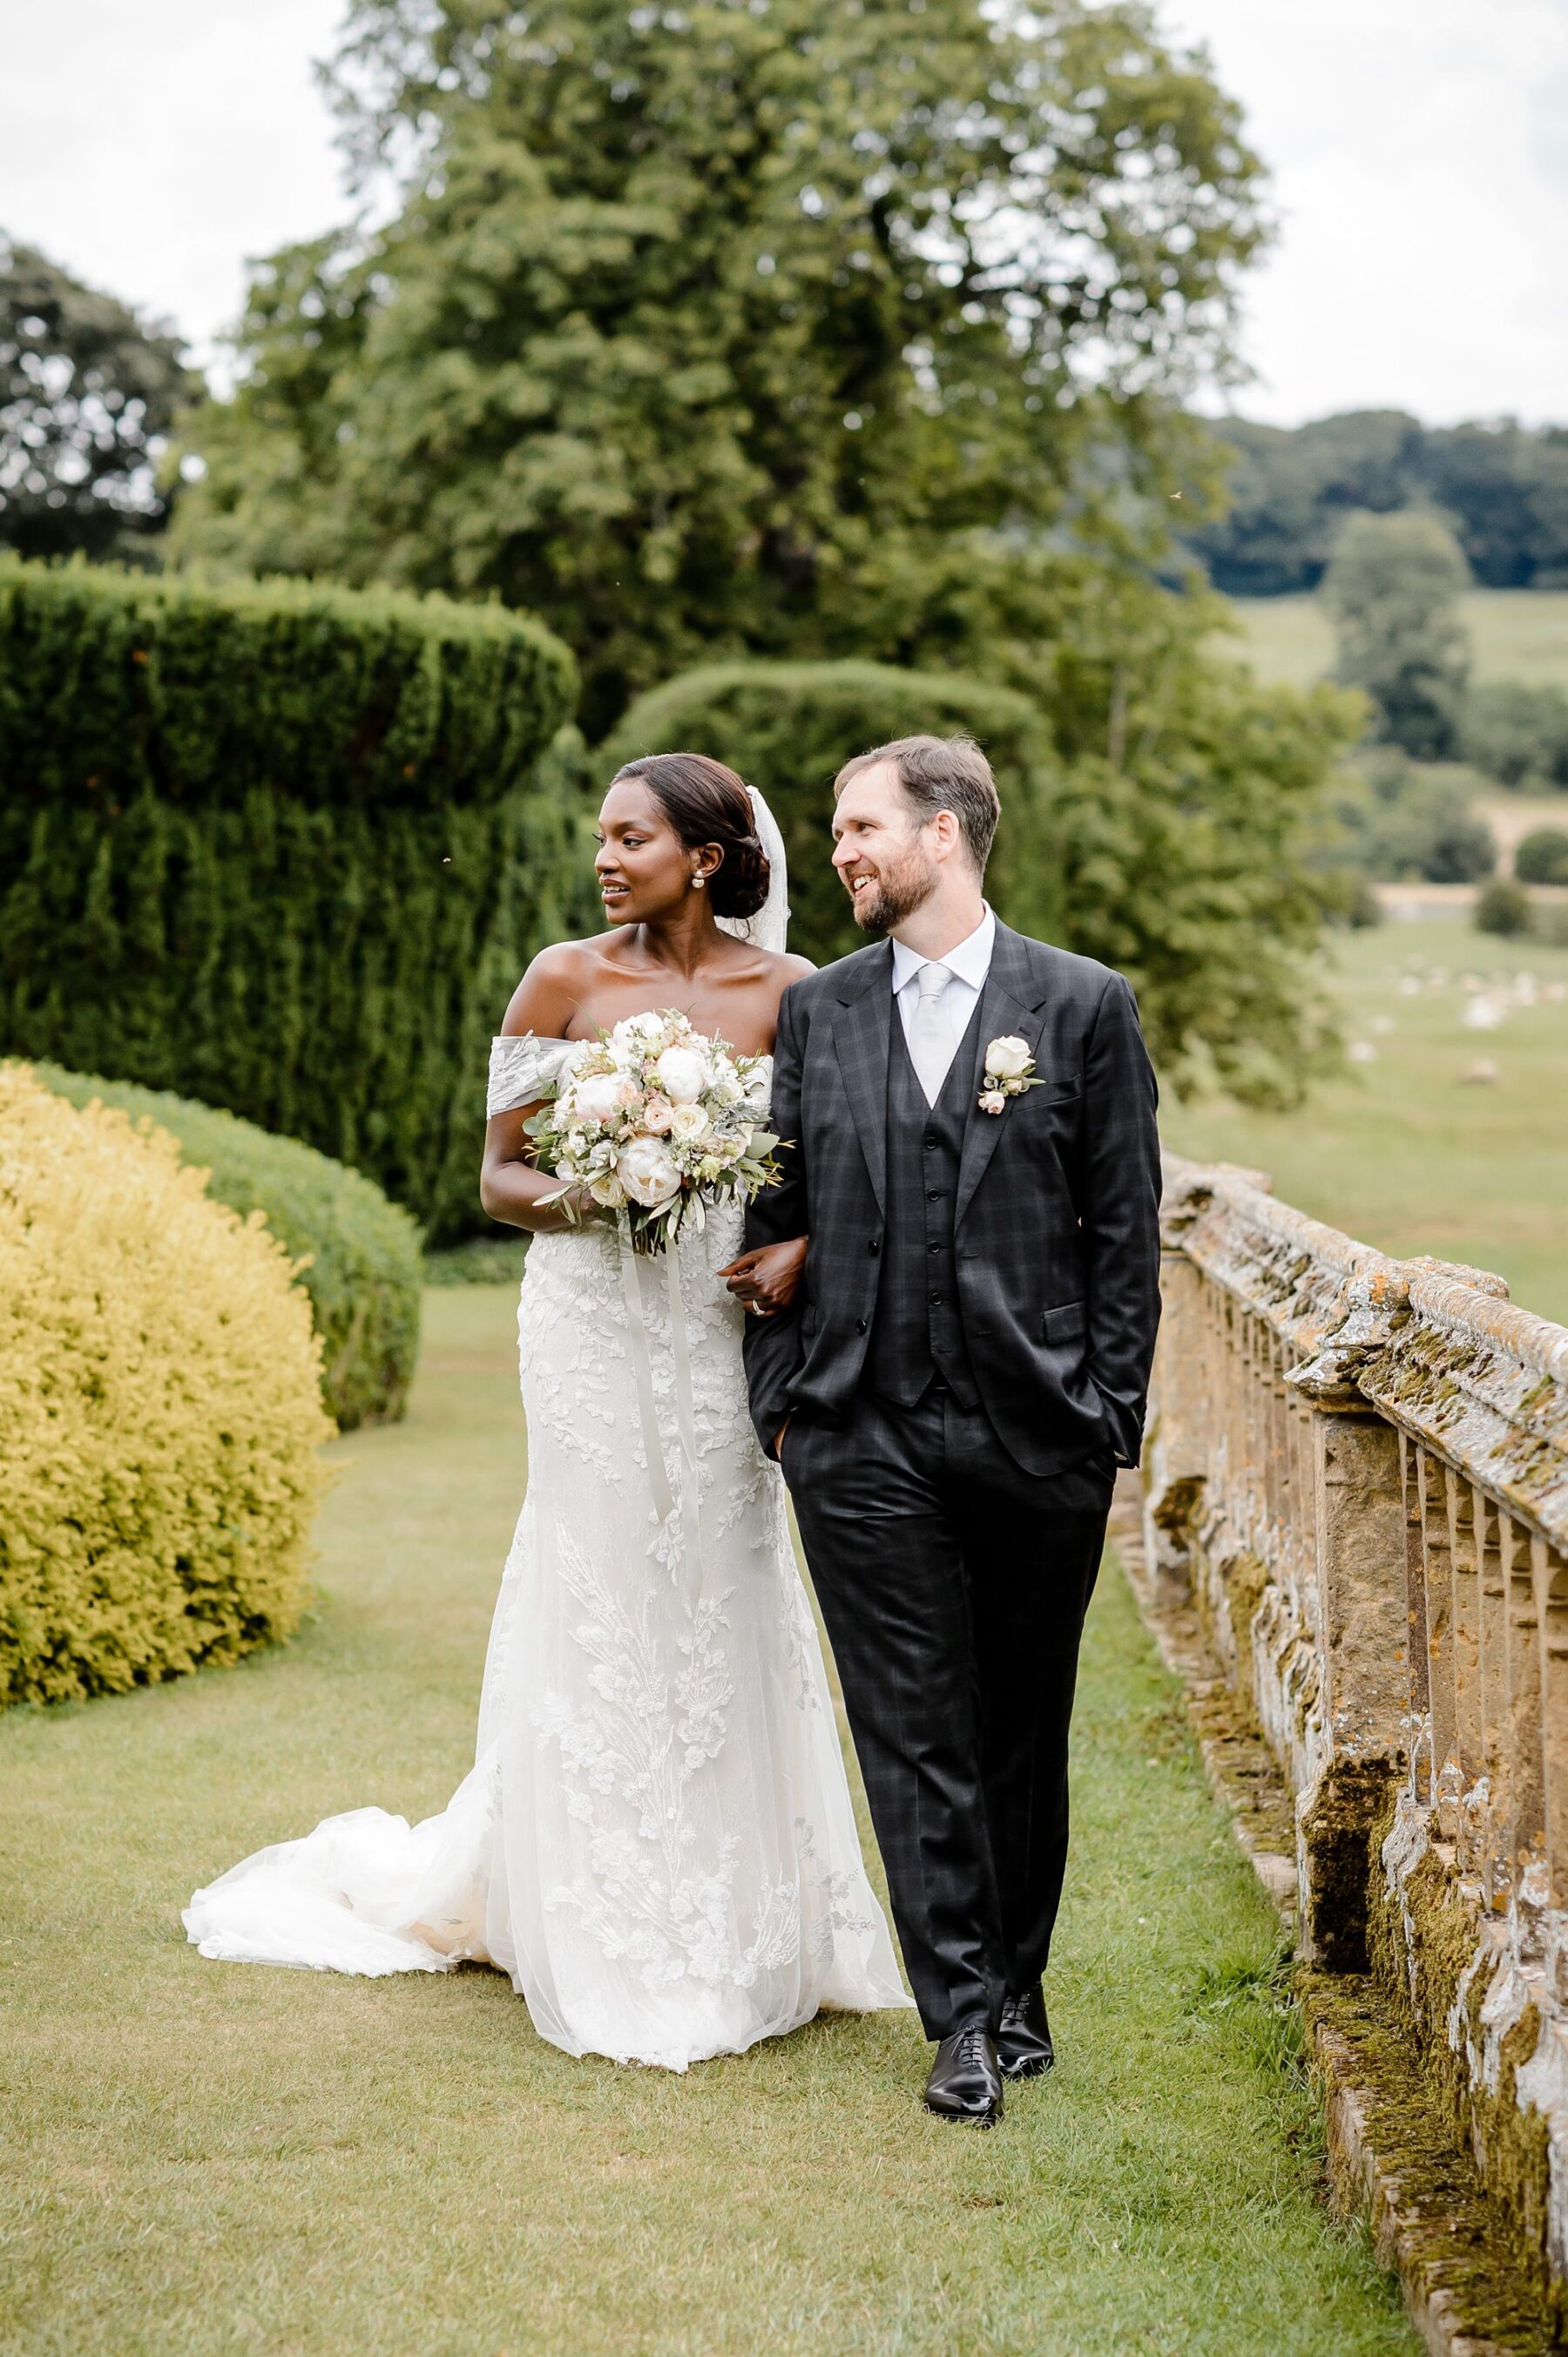 Eucalyptus Events, Cotswolds Wedding Planner - mixed race bride and groom. Beautiful black bride in off the shoulder dress and groom in checked suit.